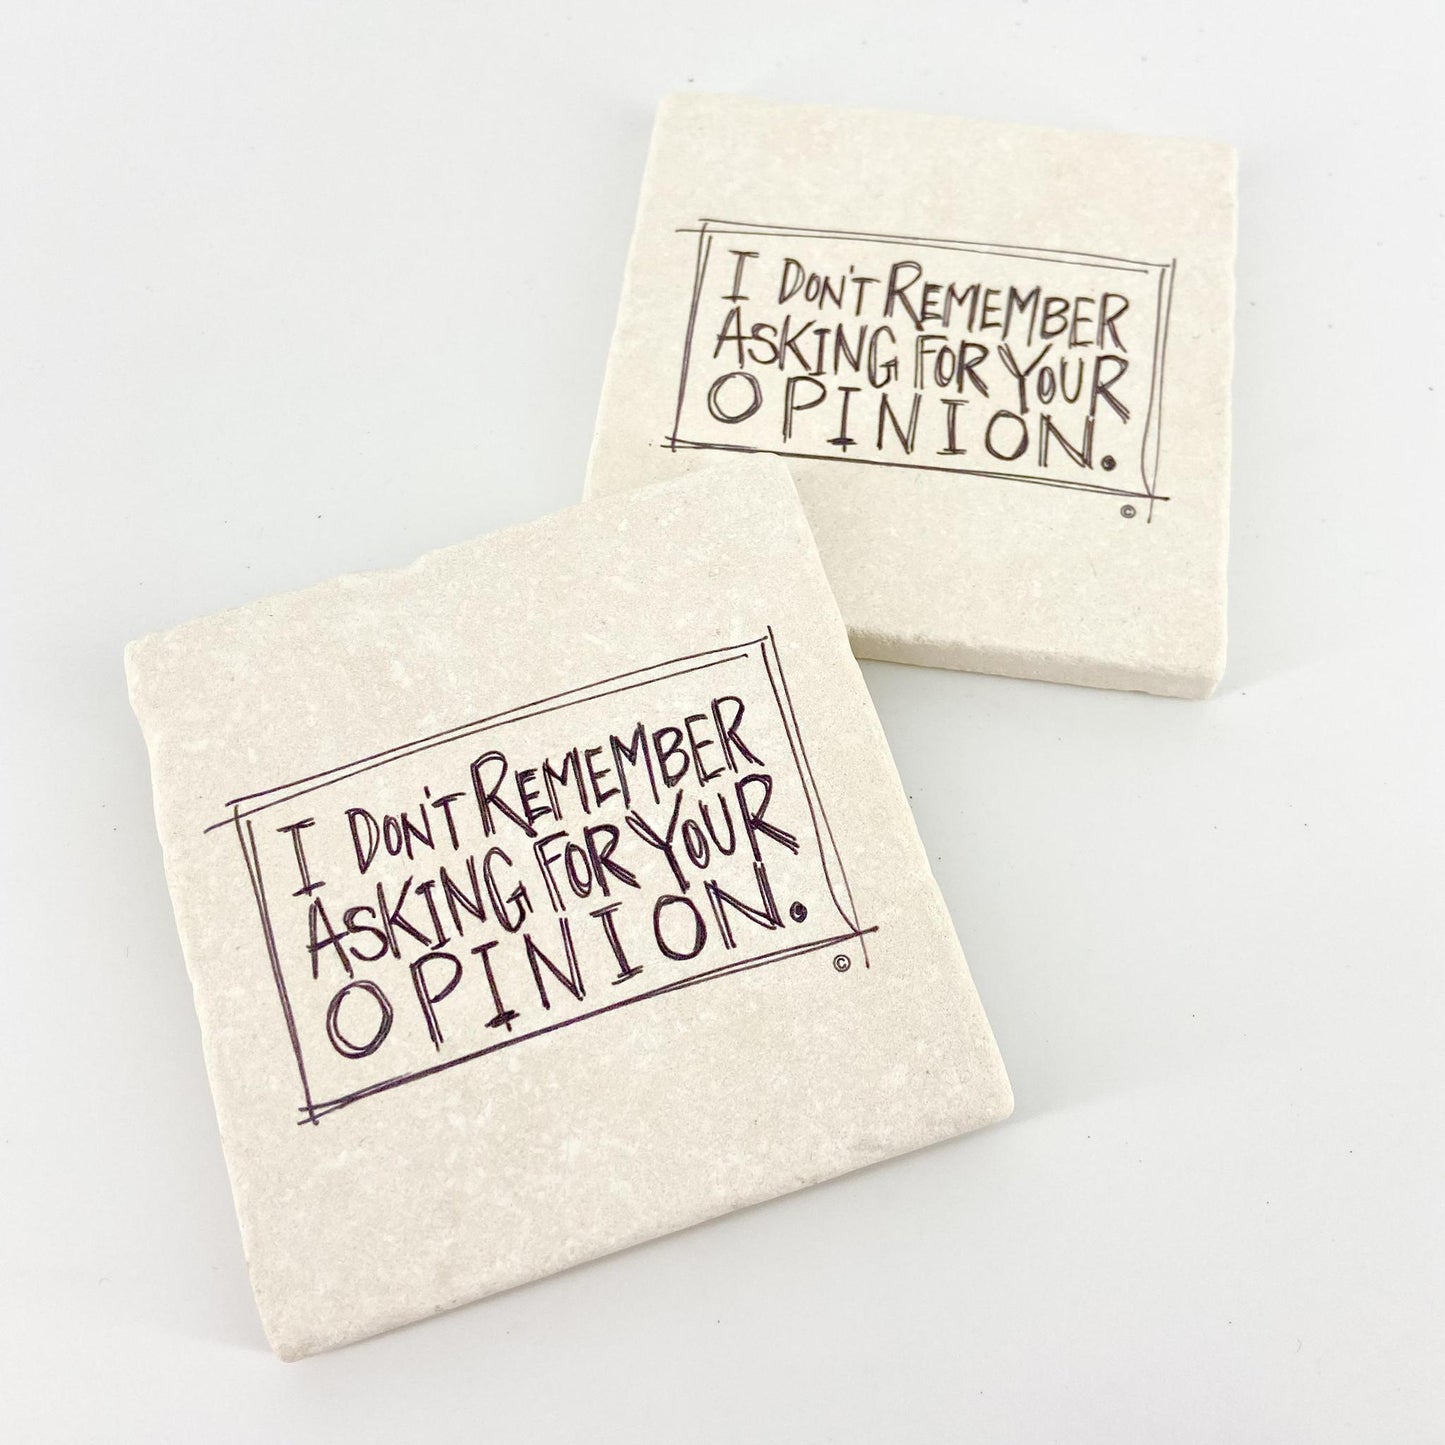 Coaster - "I Don't Remember Asking For Your Opinion"